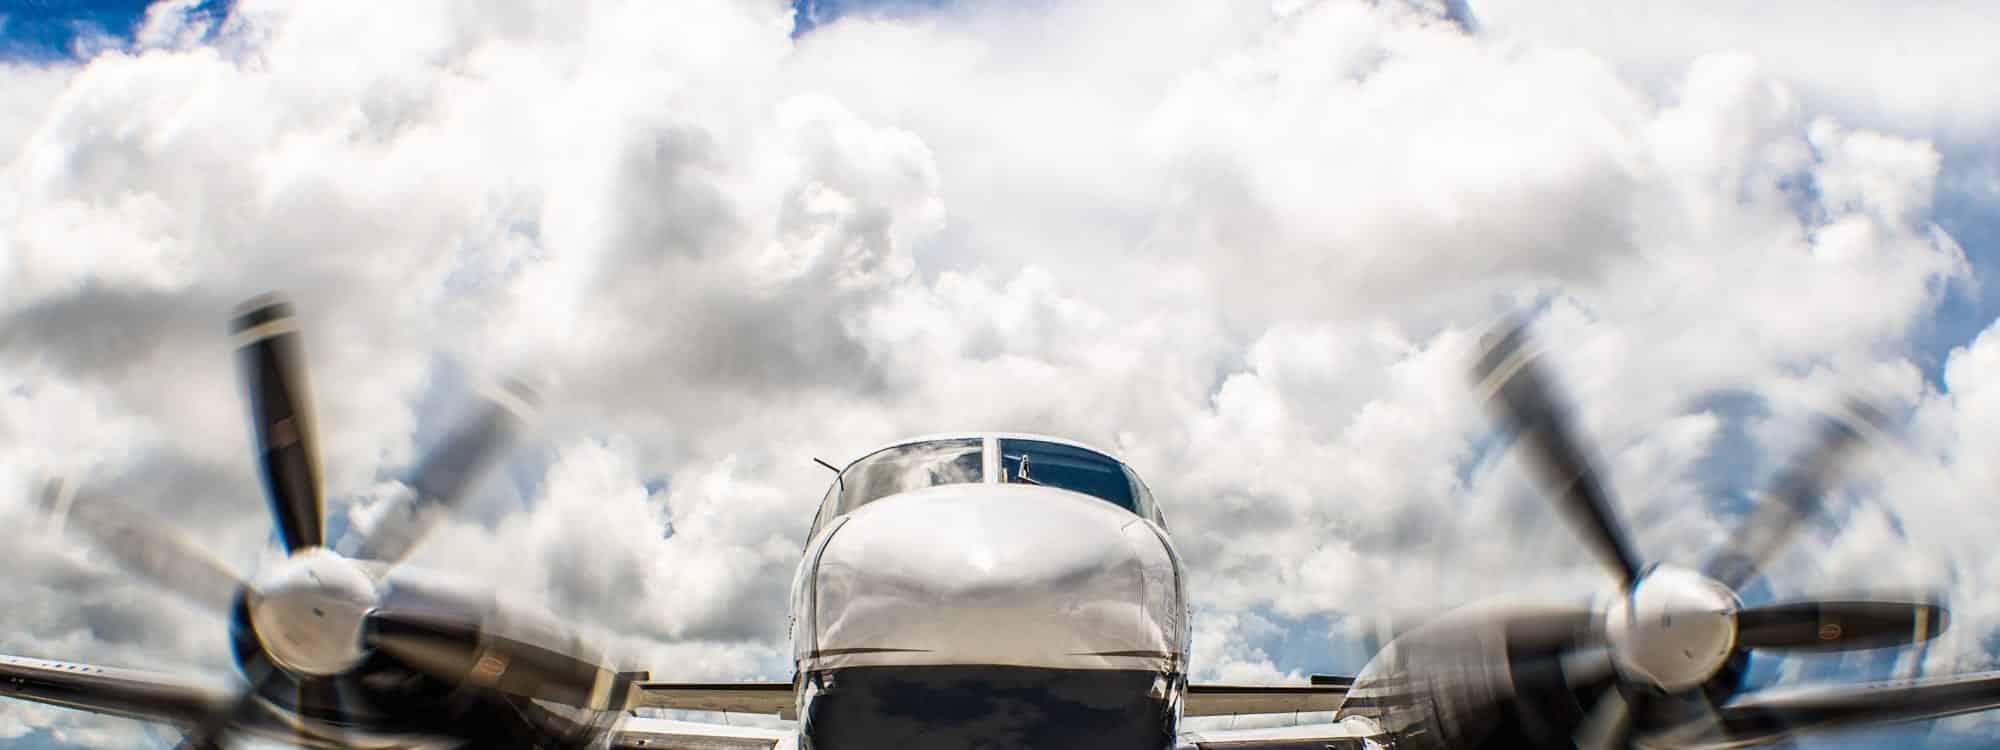 The Aviation Legislation Refresher course is designed for experienced engineers and maintenance staff seeking a short theory based refresher of their aviation legislation knowledge.